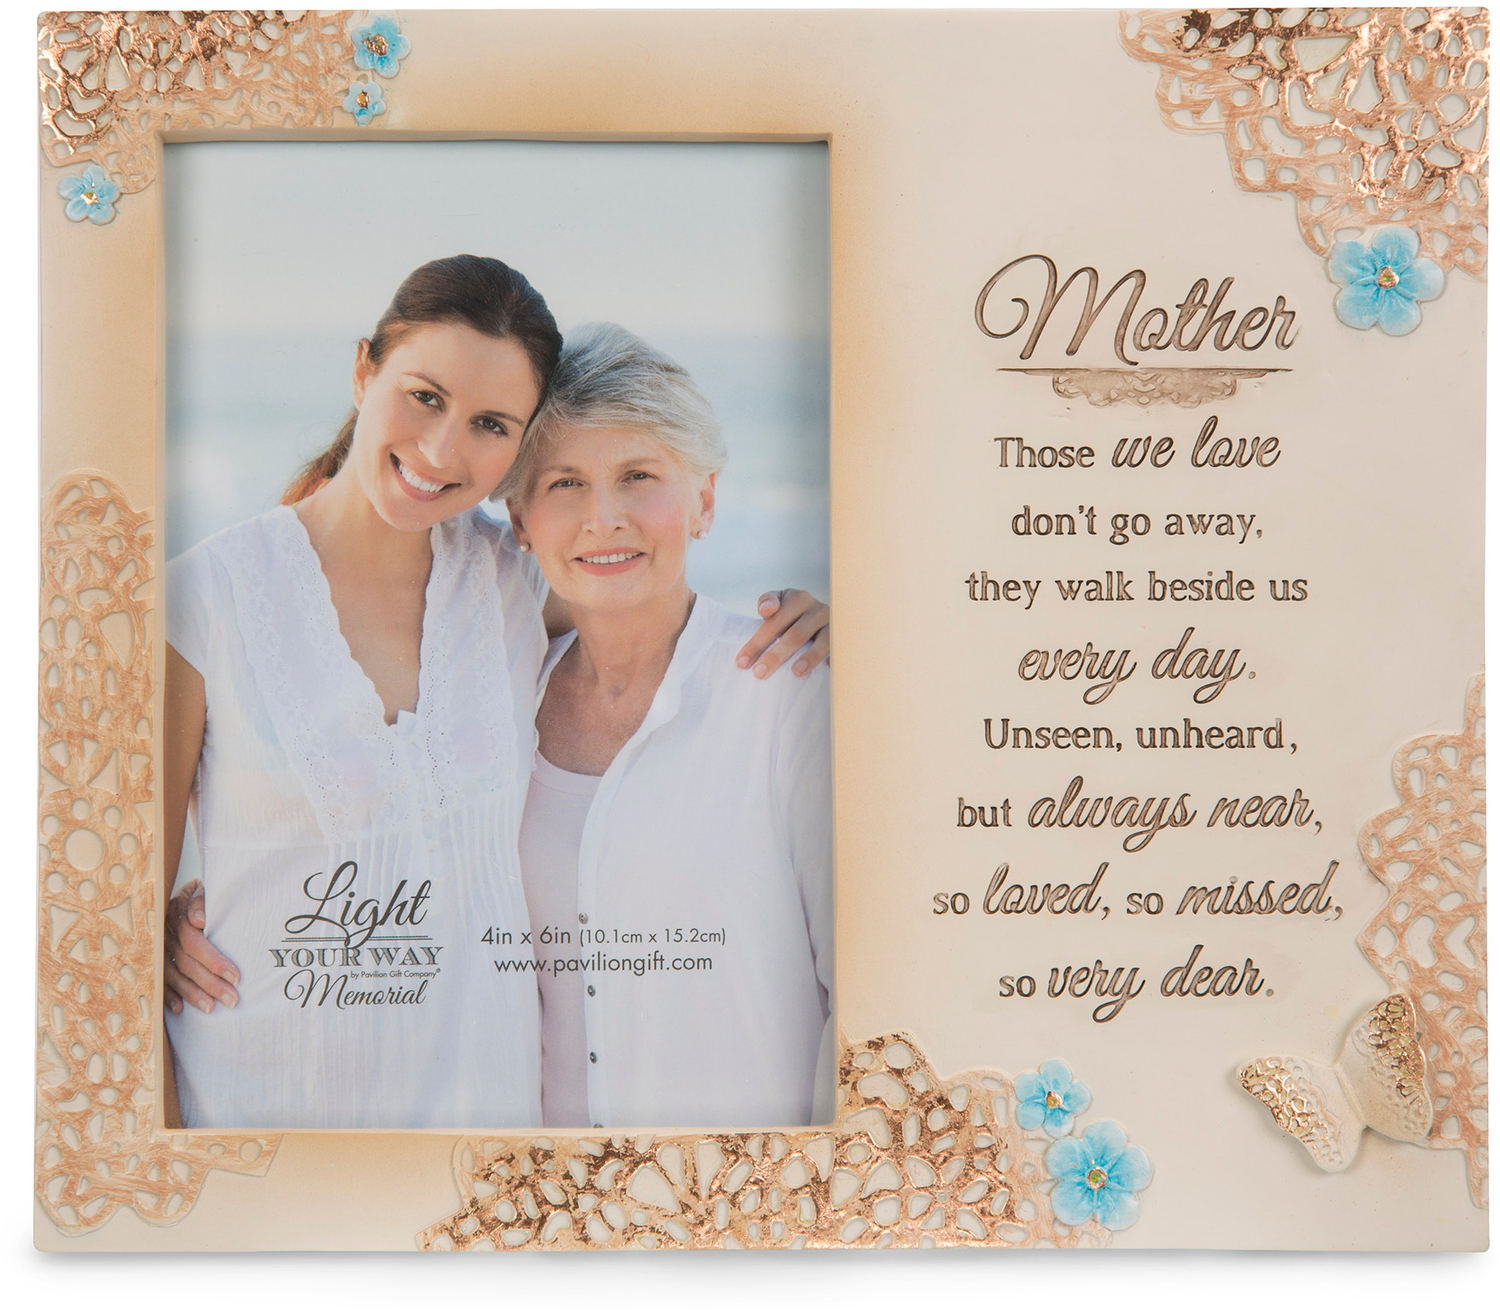 Mother  by Light Your Way Memorial - Mother  - 8" x 7" Frame (Holds 4" x 6" Photo)